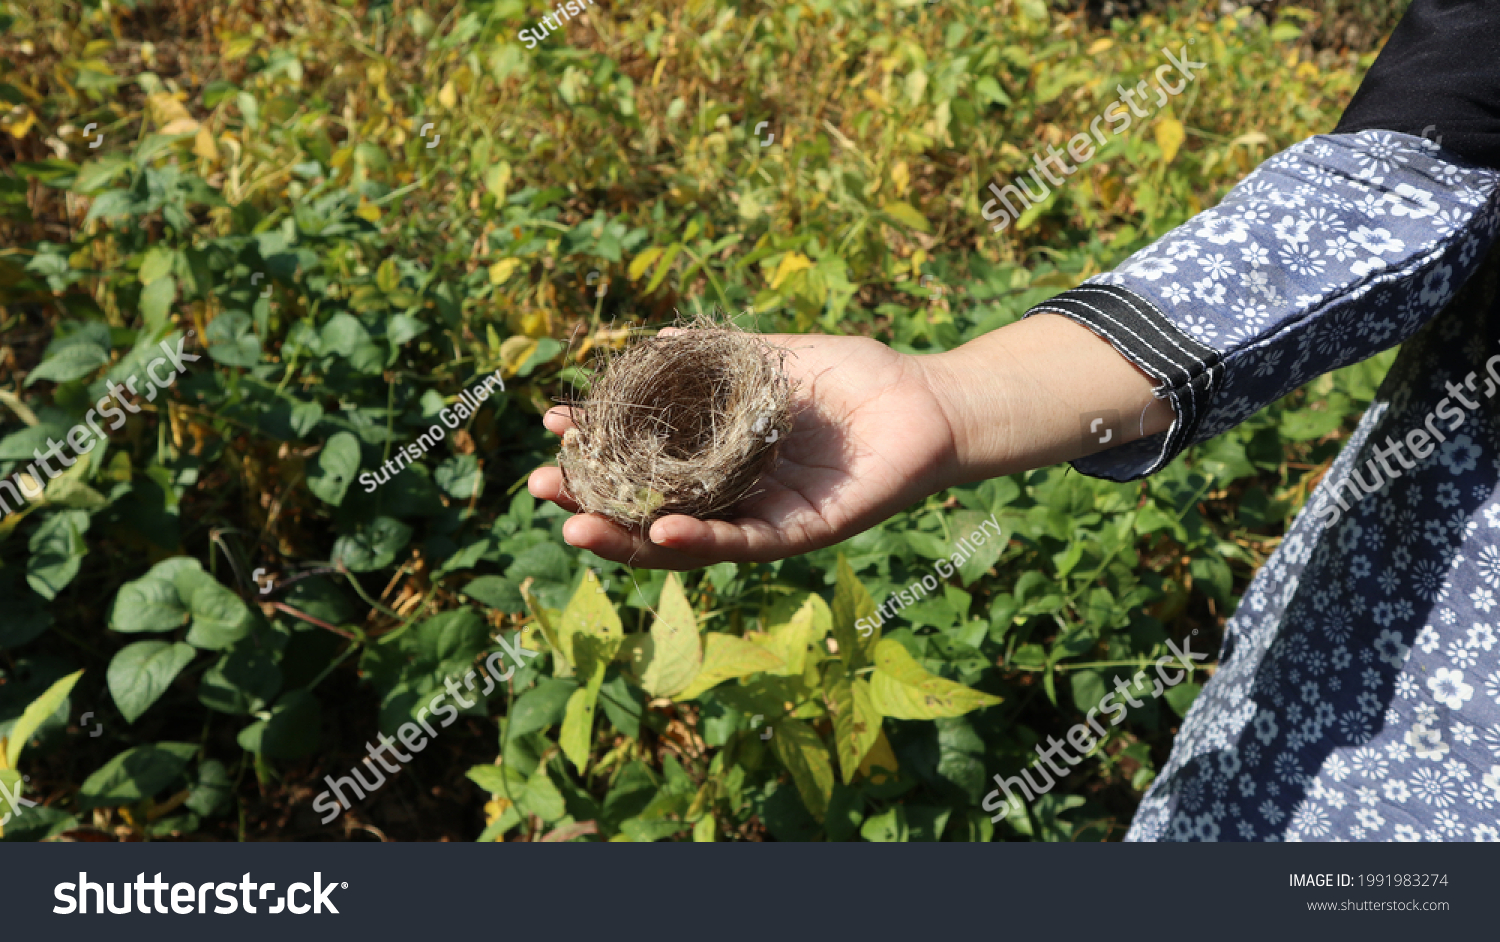 Woman's hand holding empty fragile bird's nest, view from above on a sunny day against yellow soybean garden background. Empty nest syndrome concept.  #1991983274